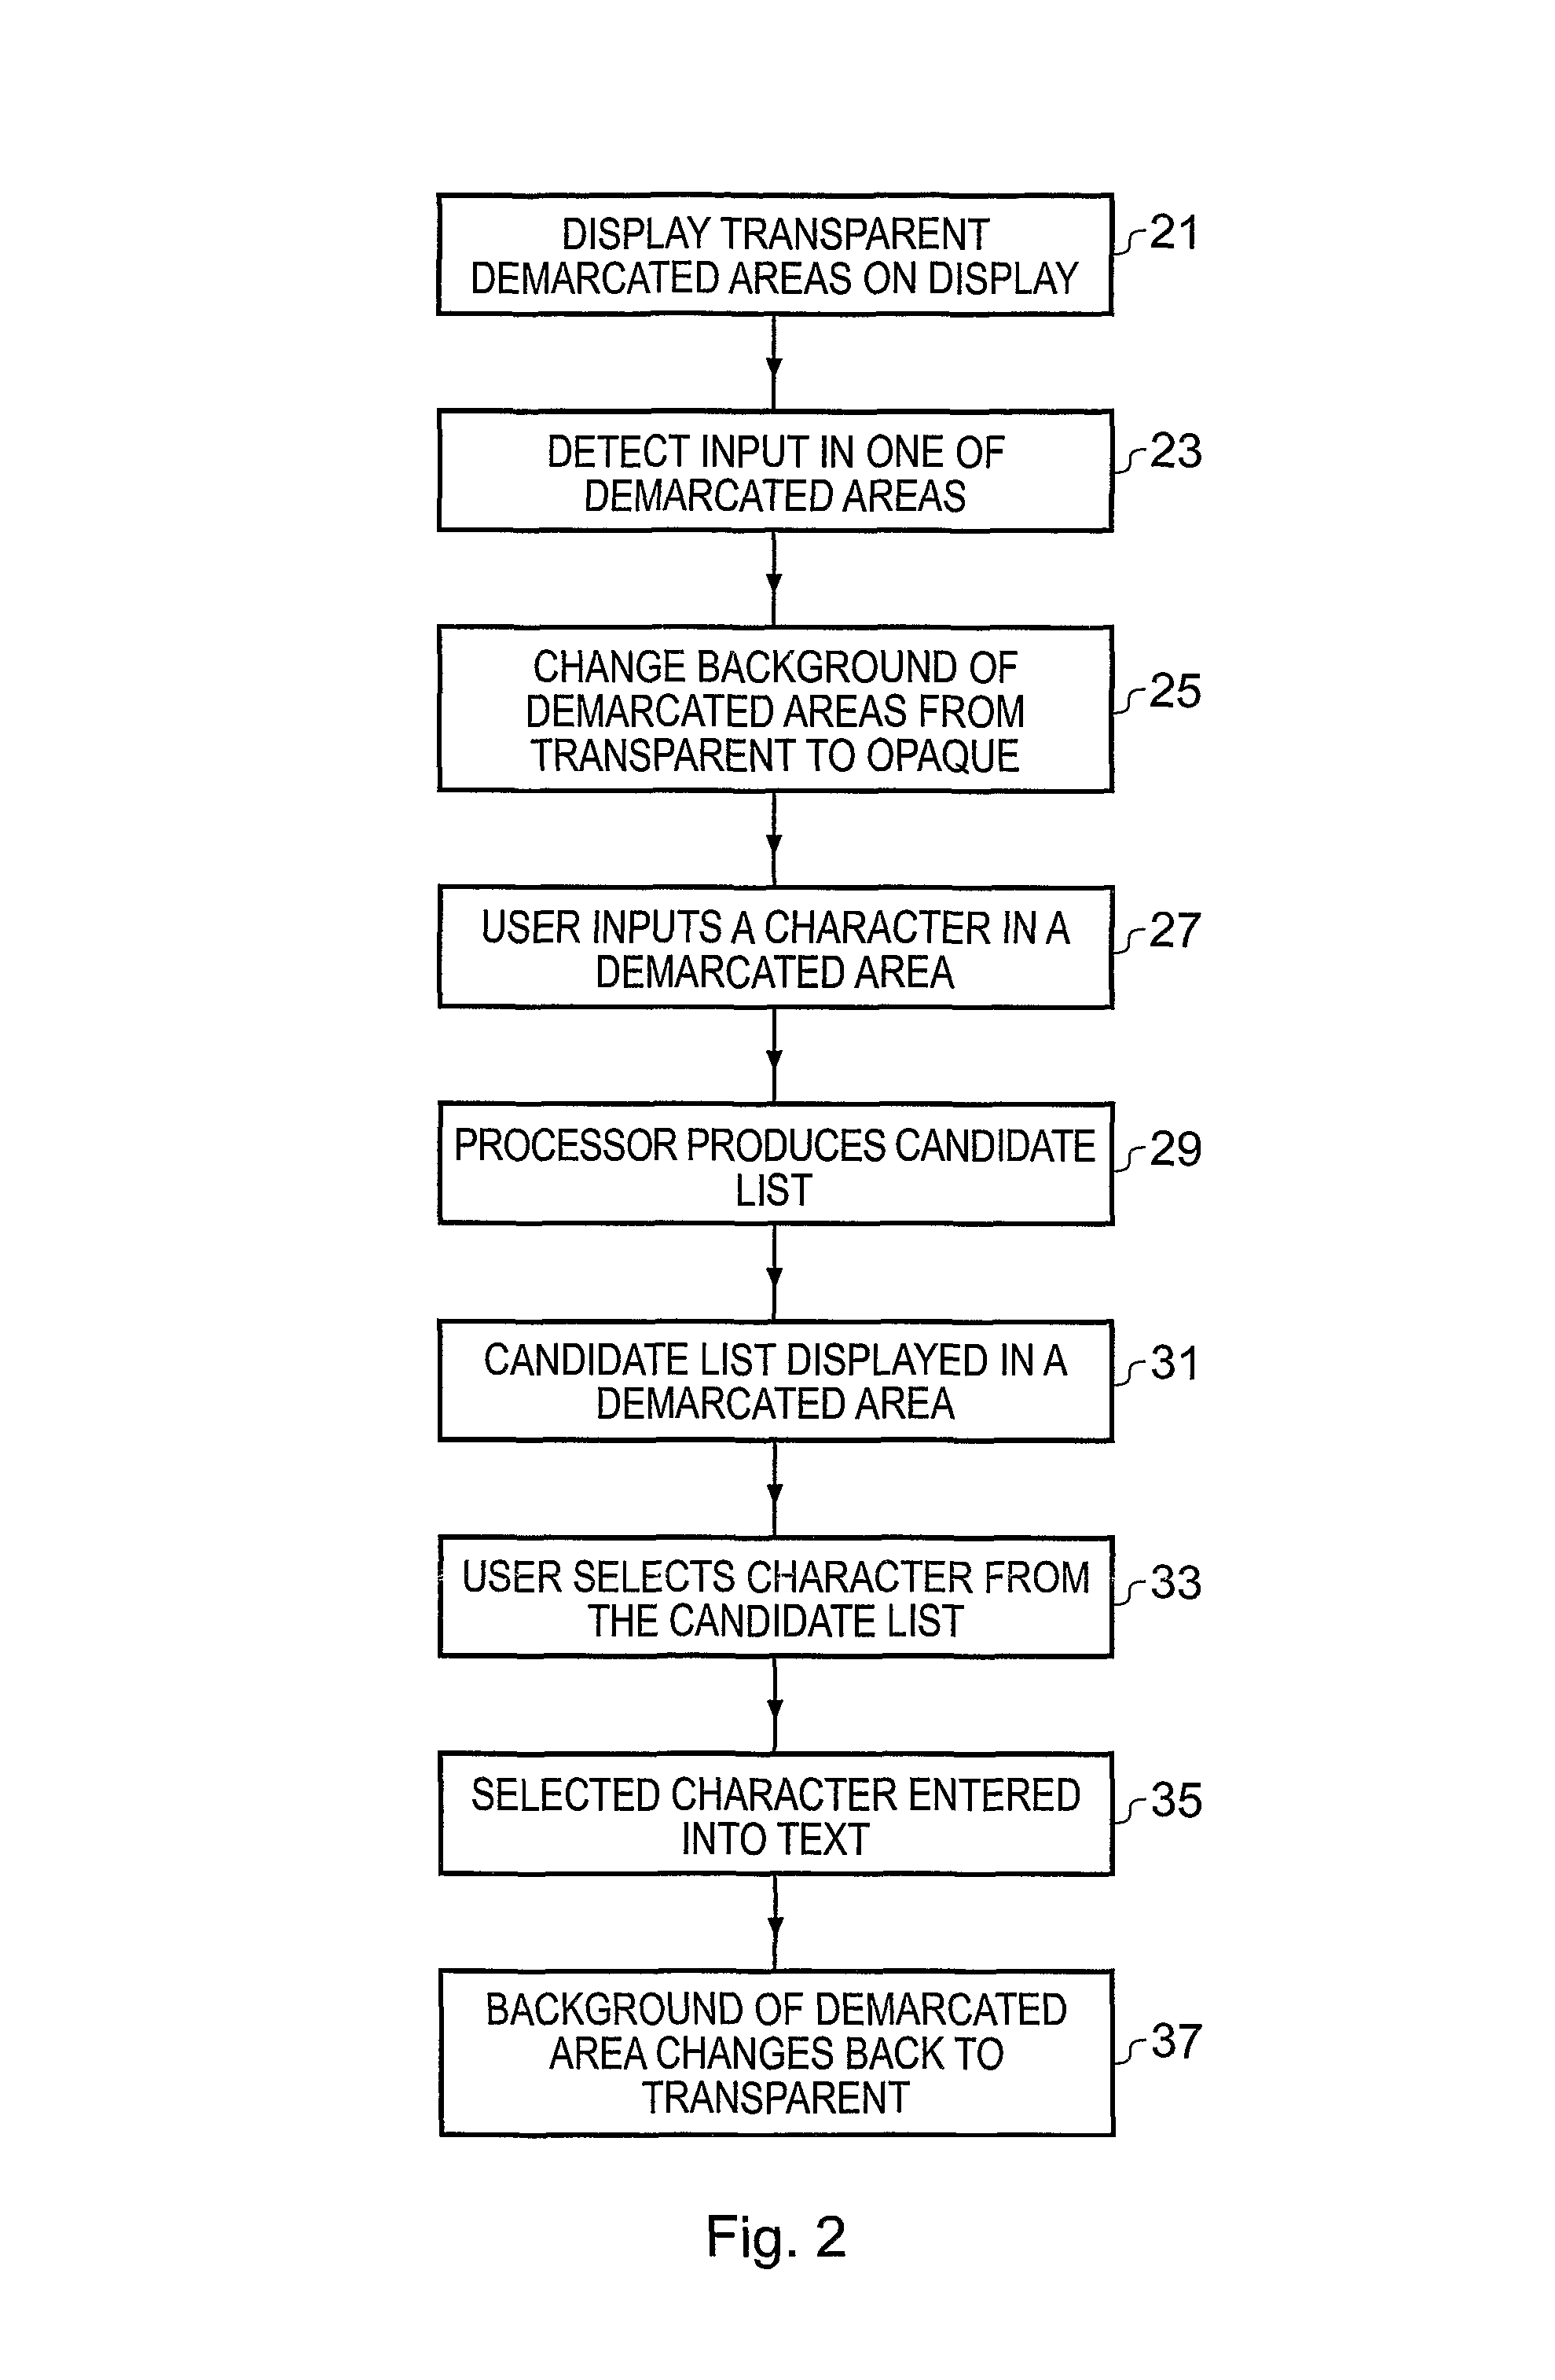 Text entry into electronic devices